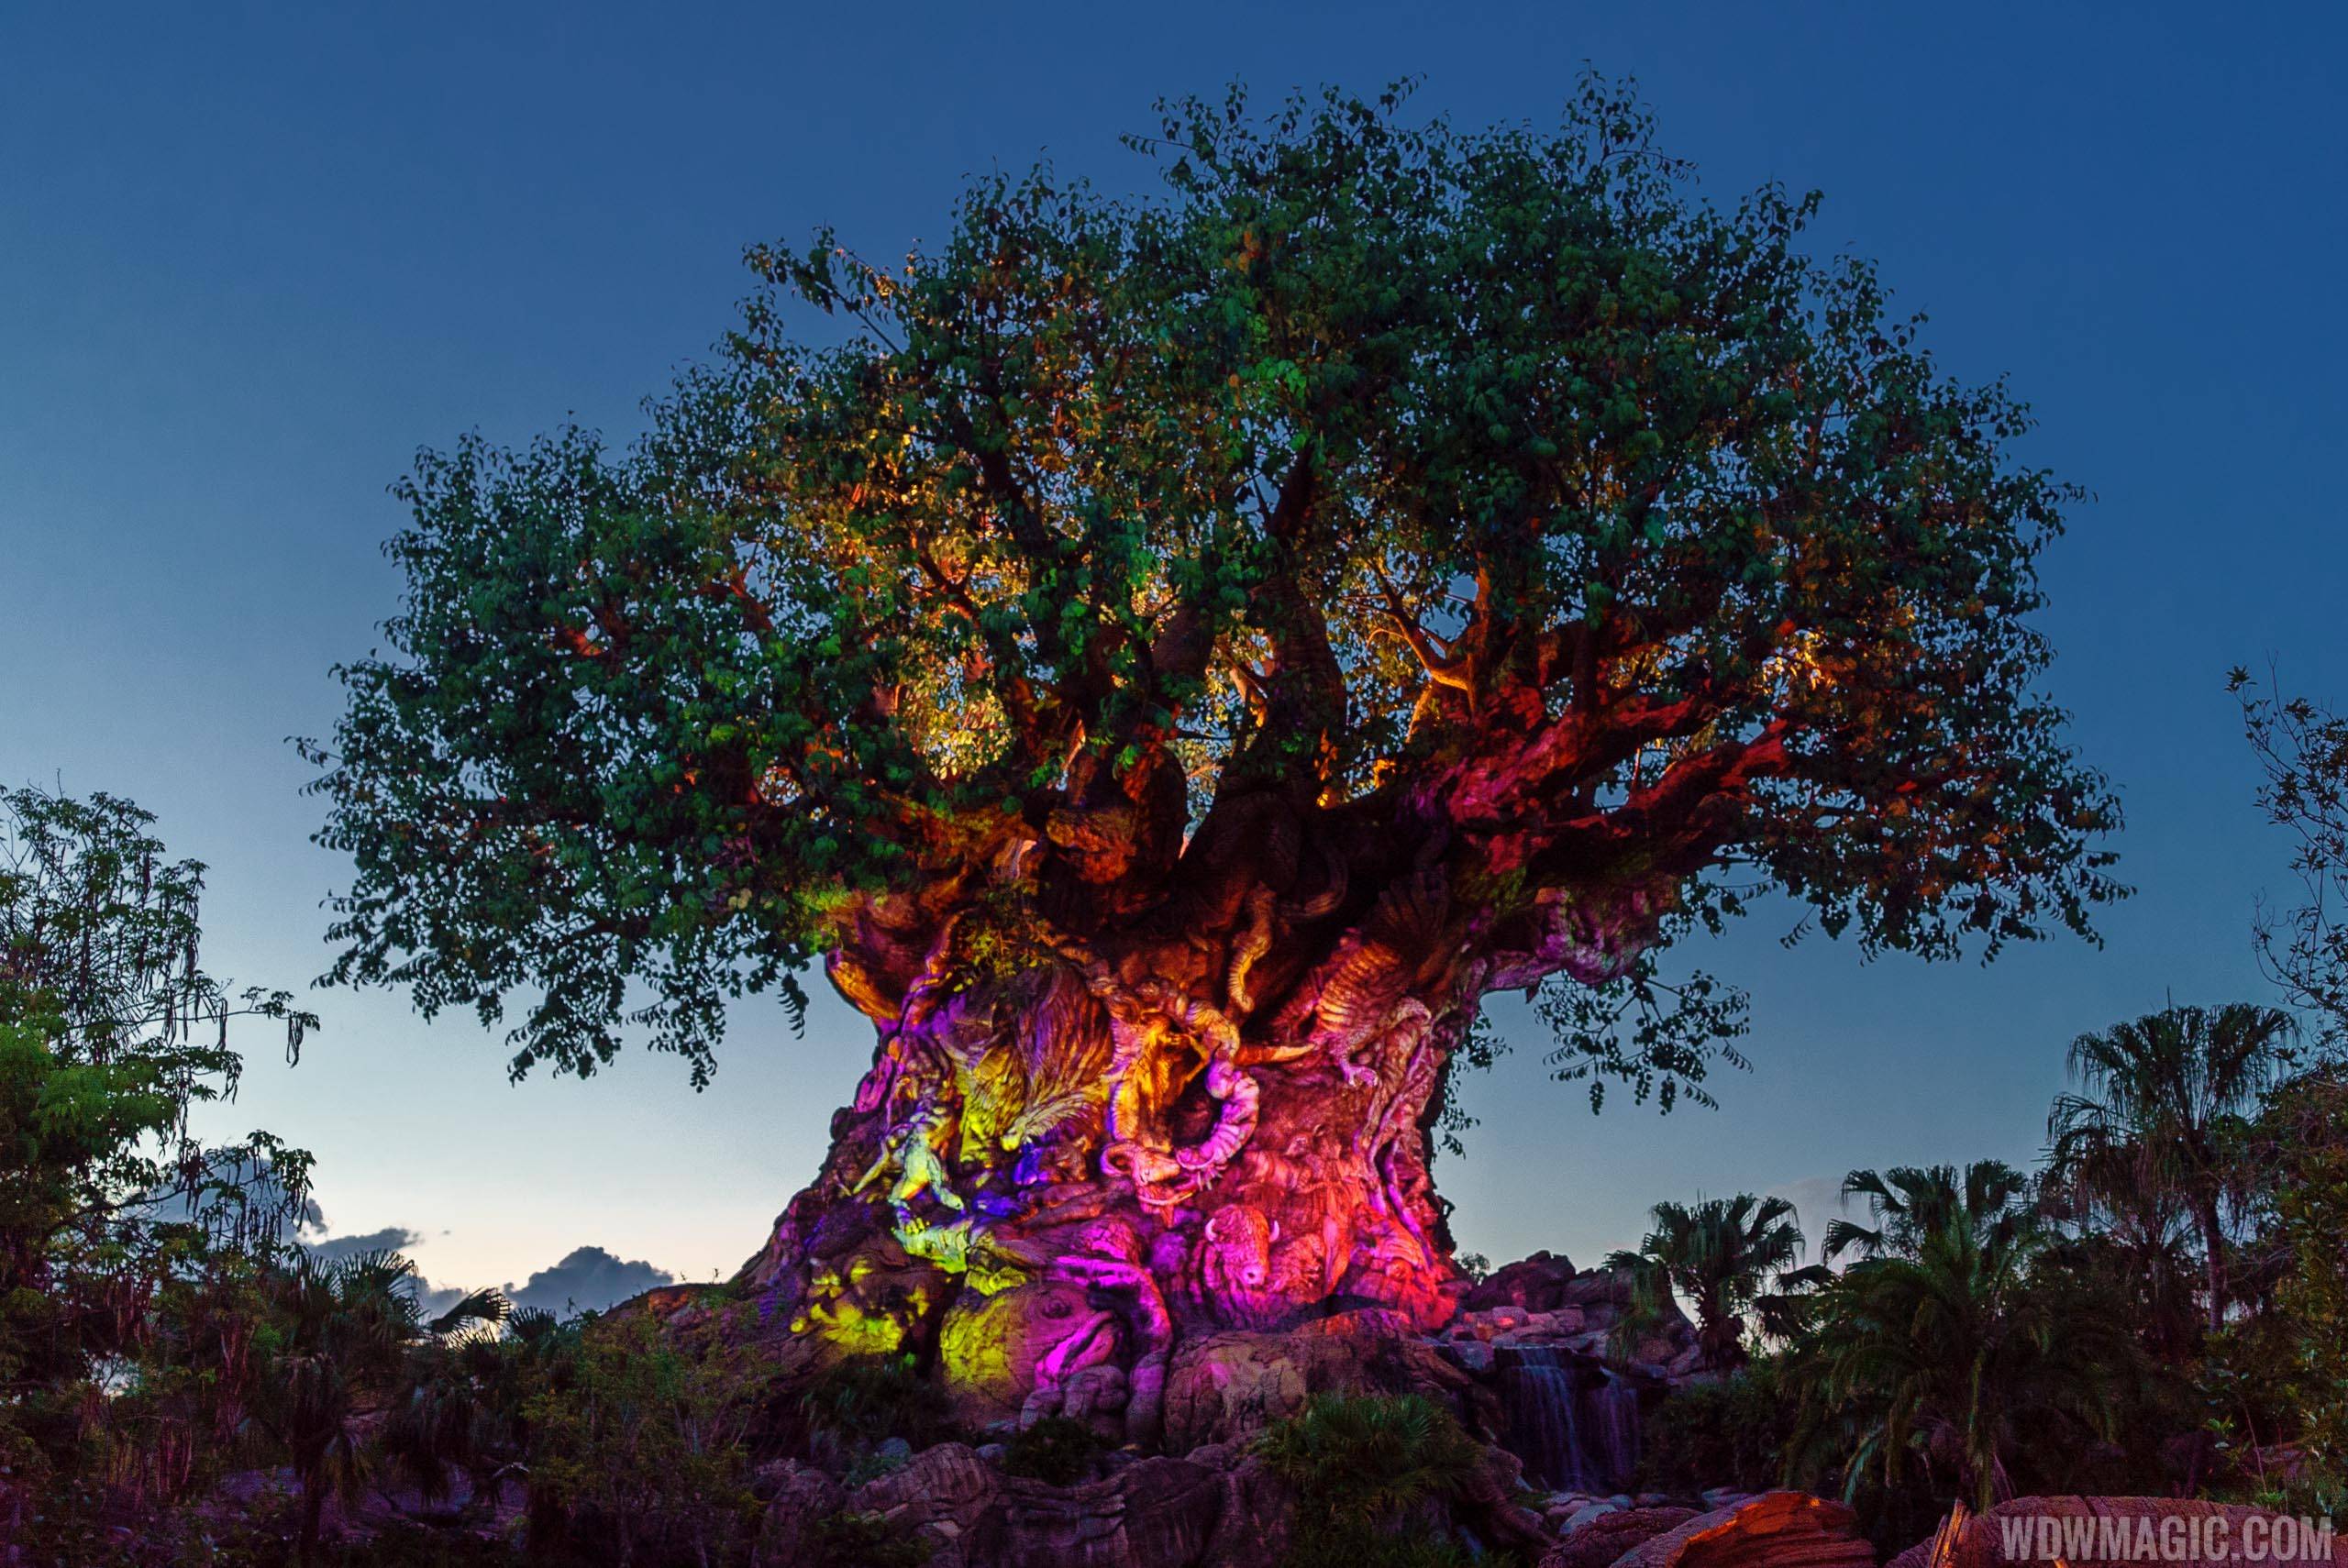 VIDEO - Take a time-lapse look at the building of the Tree of Life at Disney's Animal Kingdom